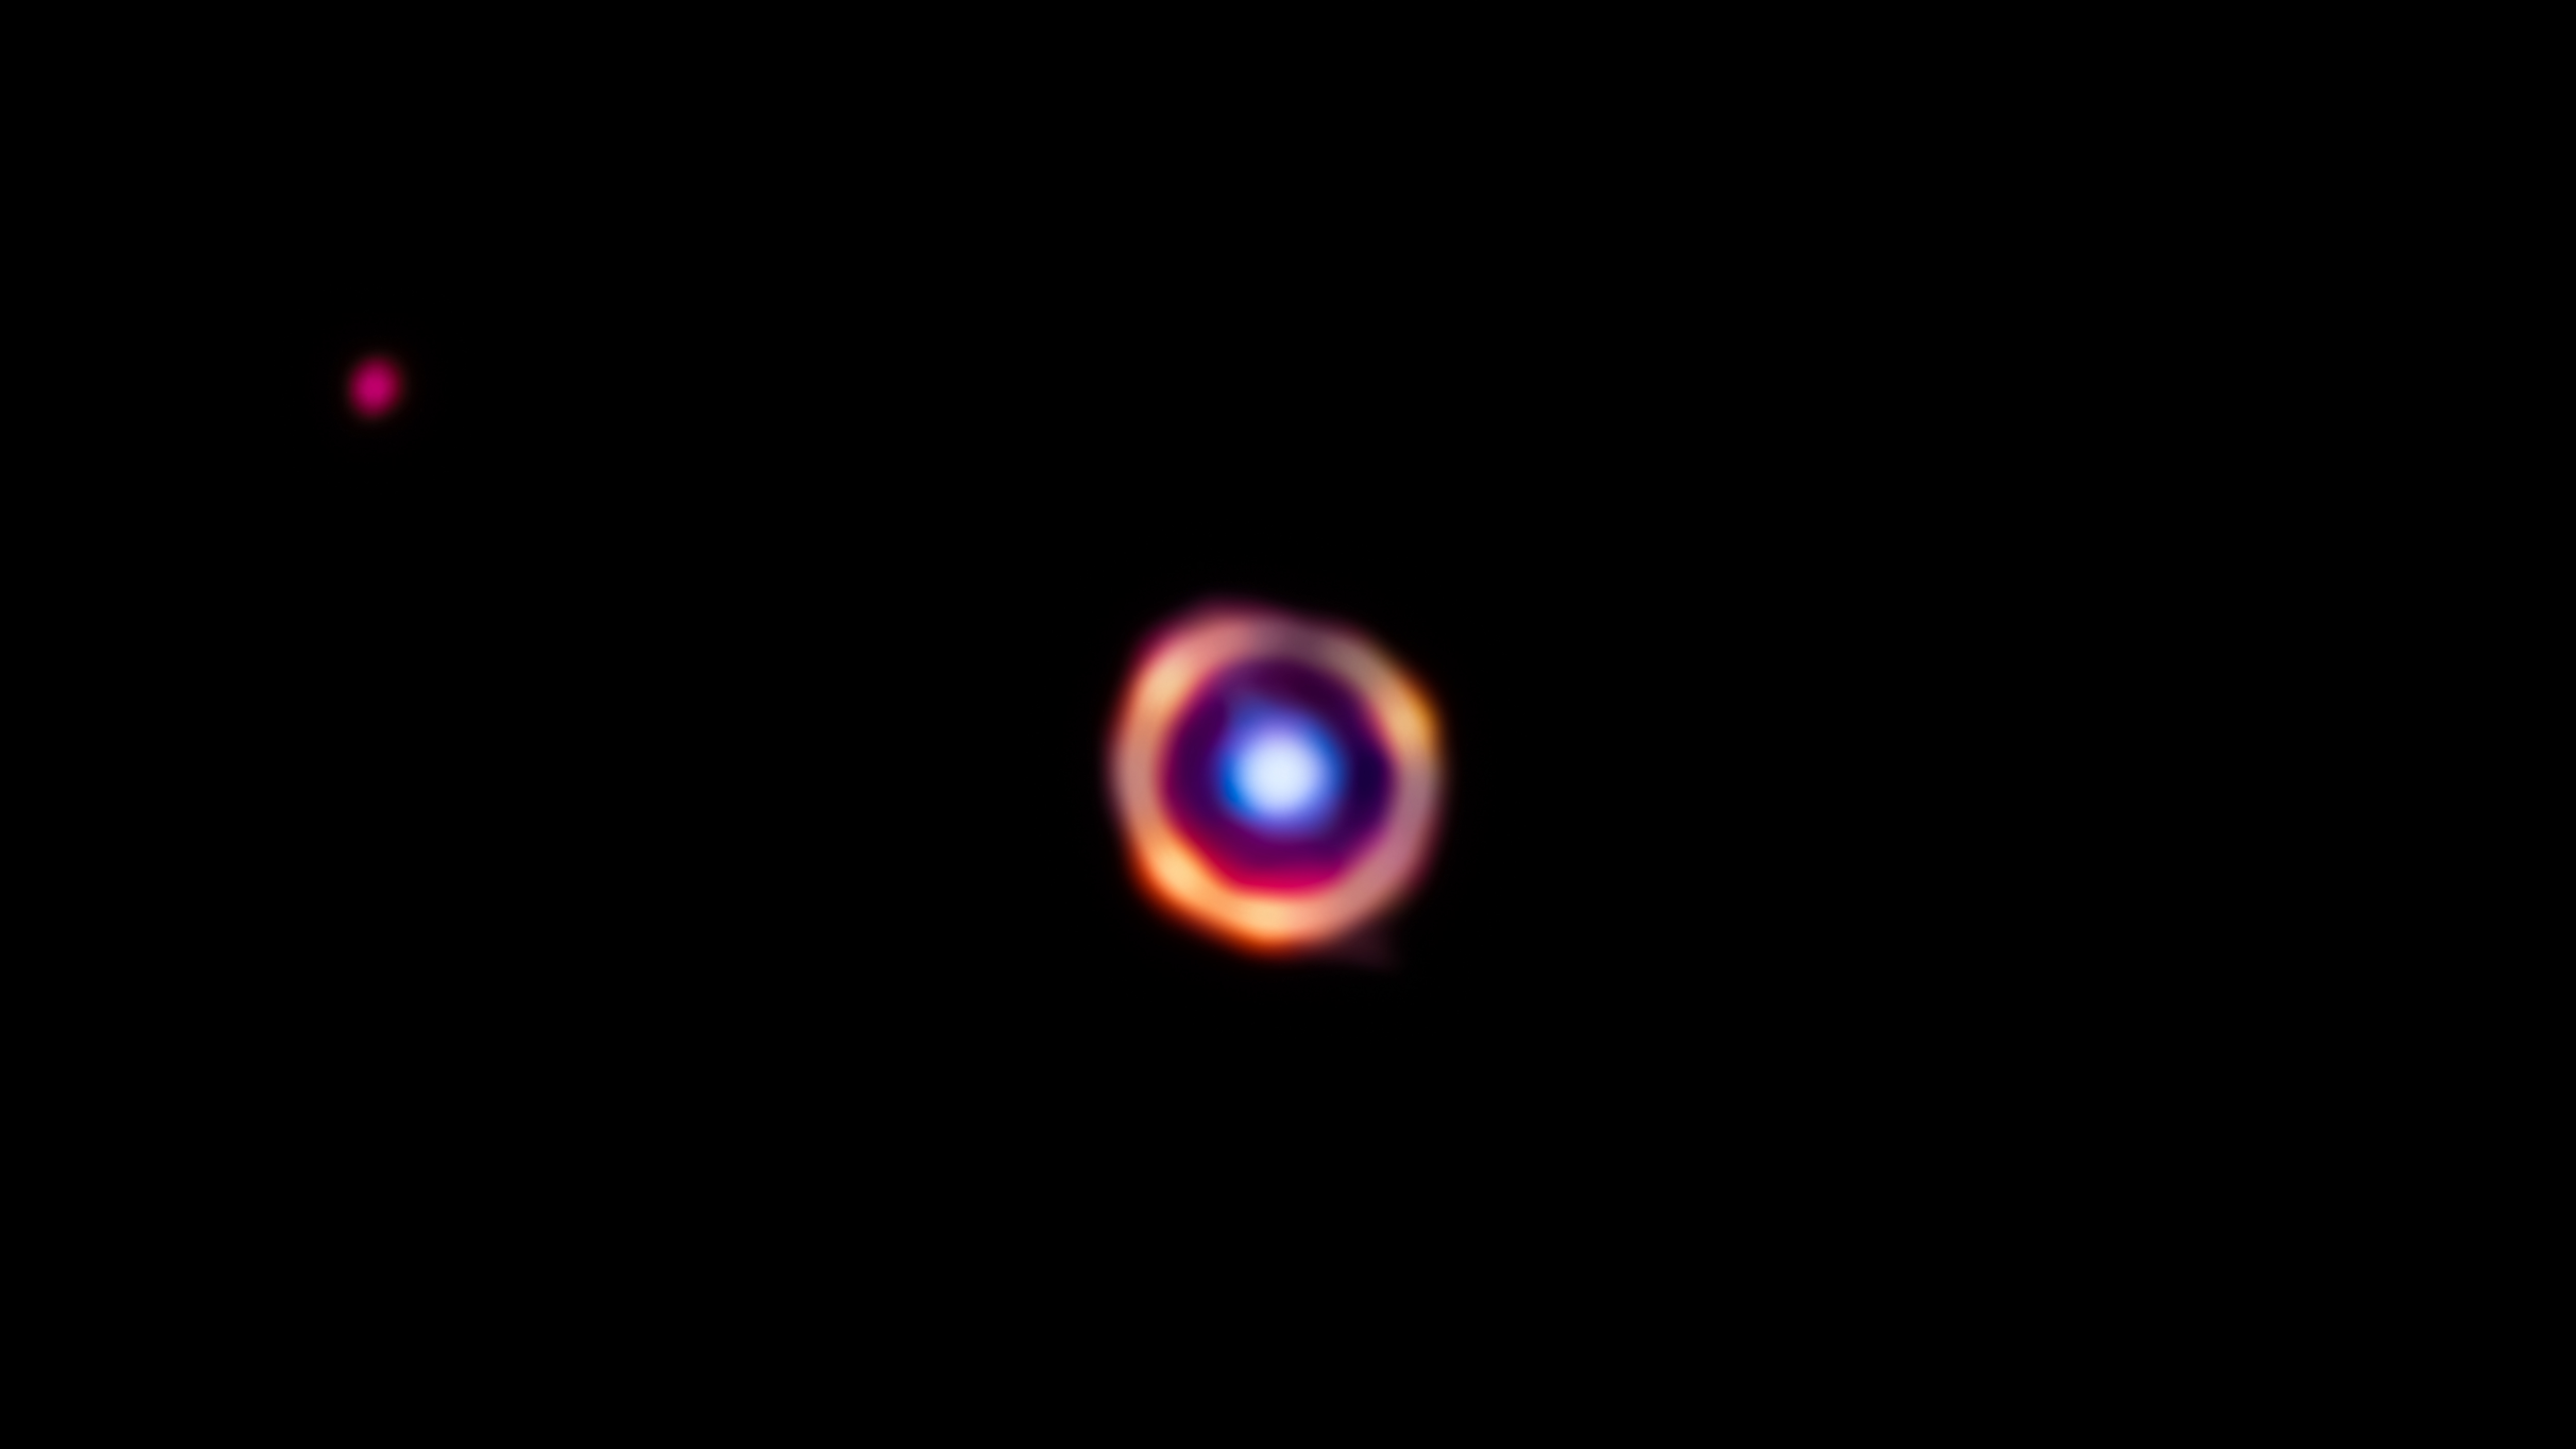 False-color James Webb Space Telescope image of an Einstein ring, composed of a foreground galaxy shown in blue and a background galaxy shown in red along with organic molecules that are highlighted in orange